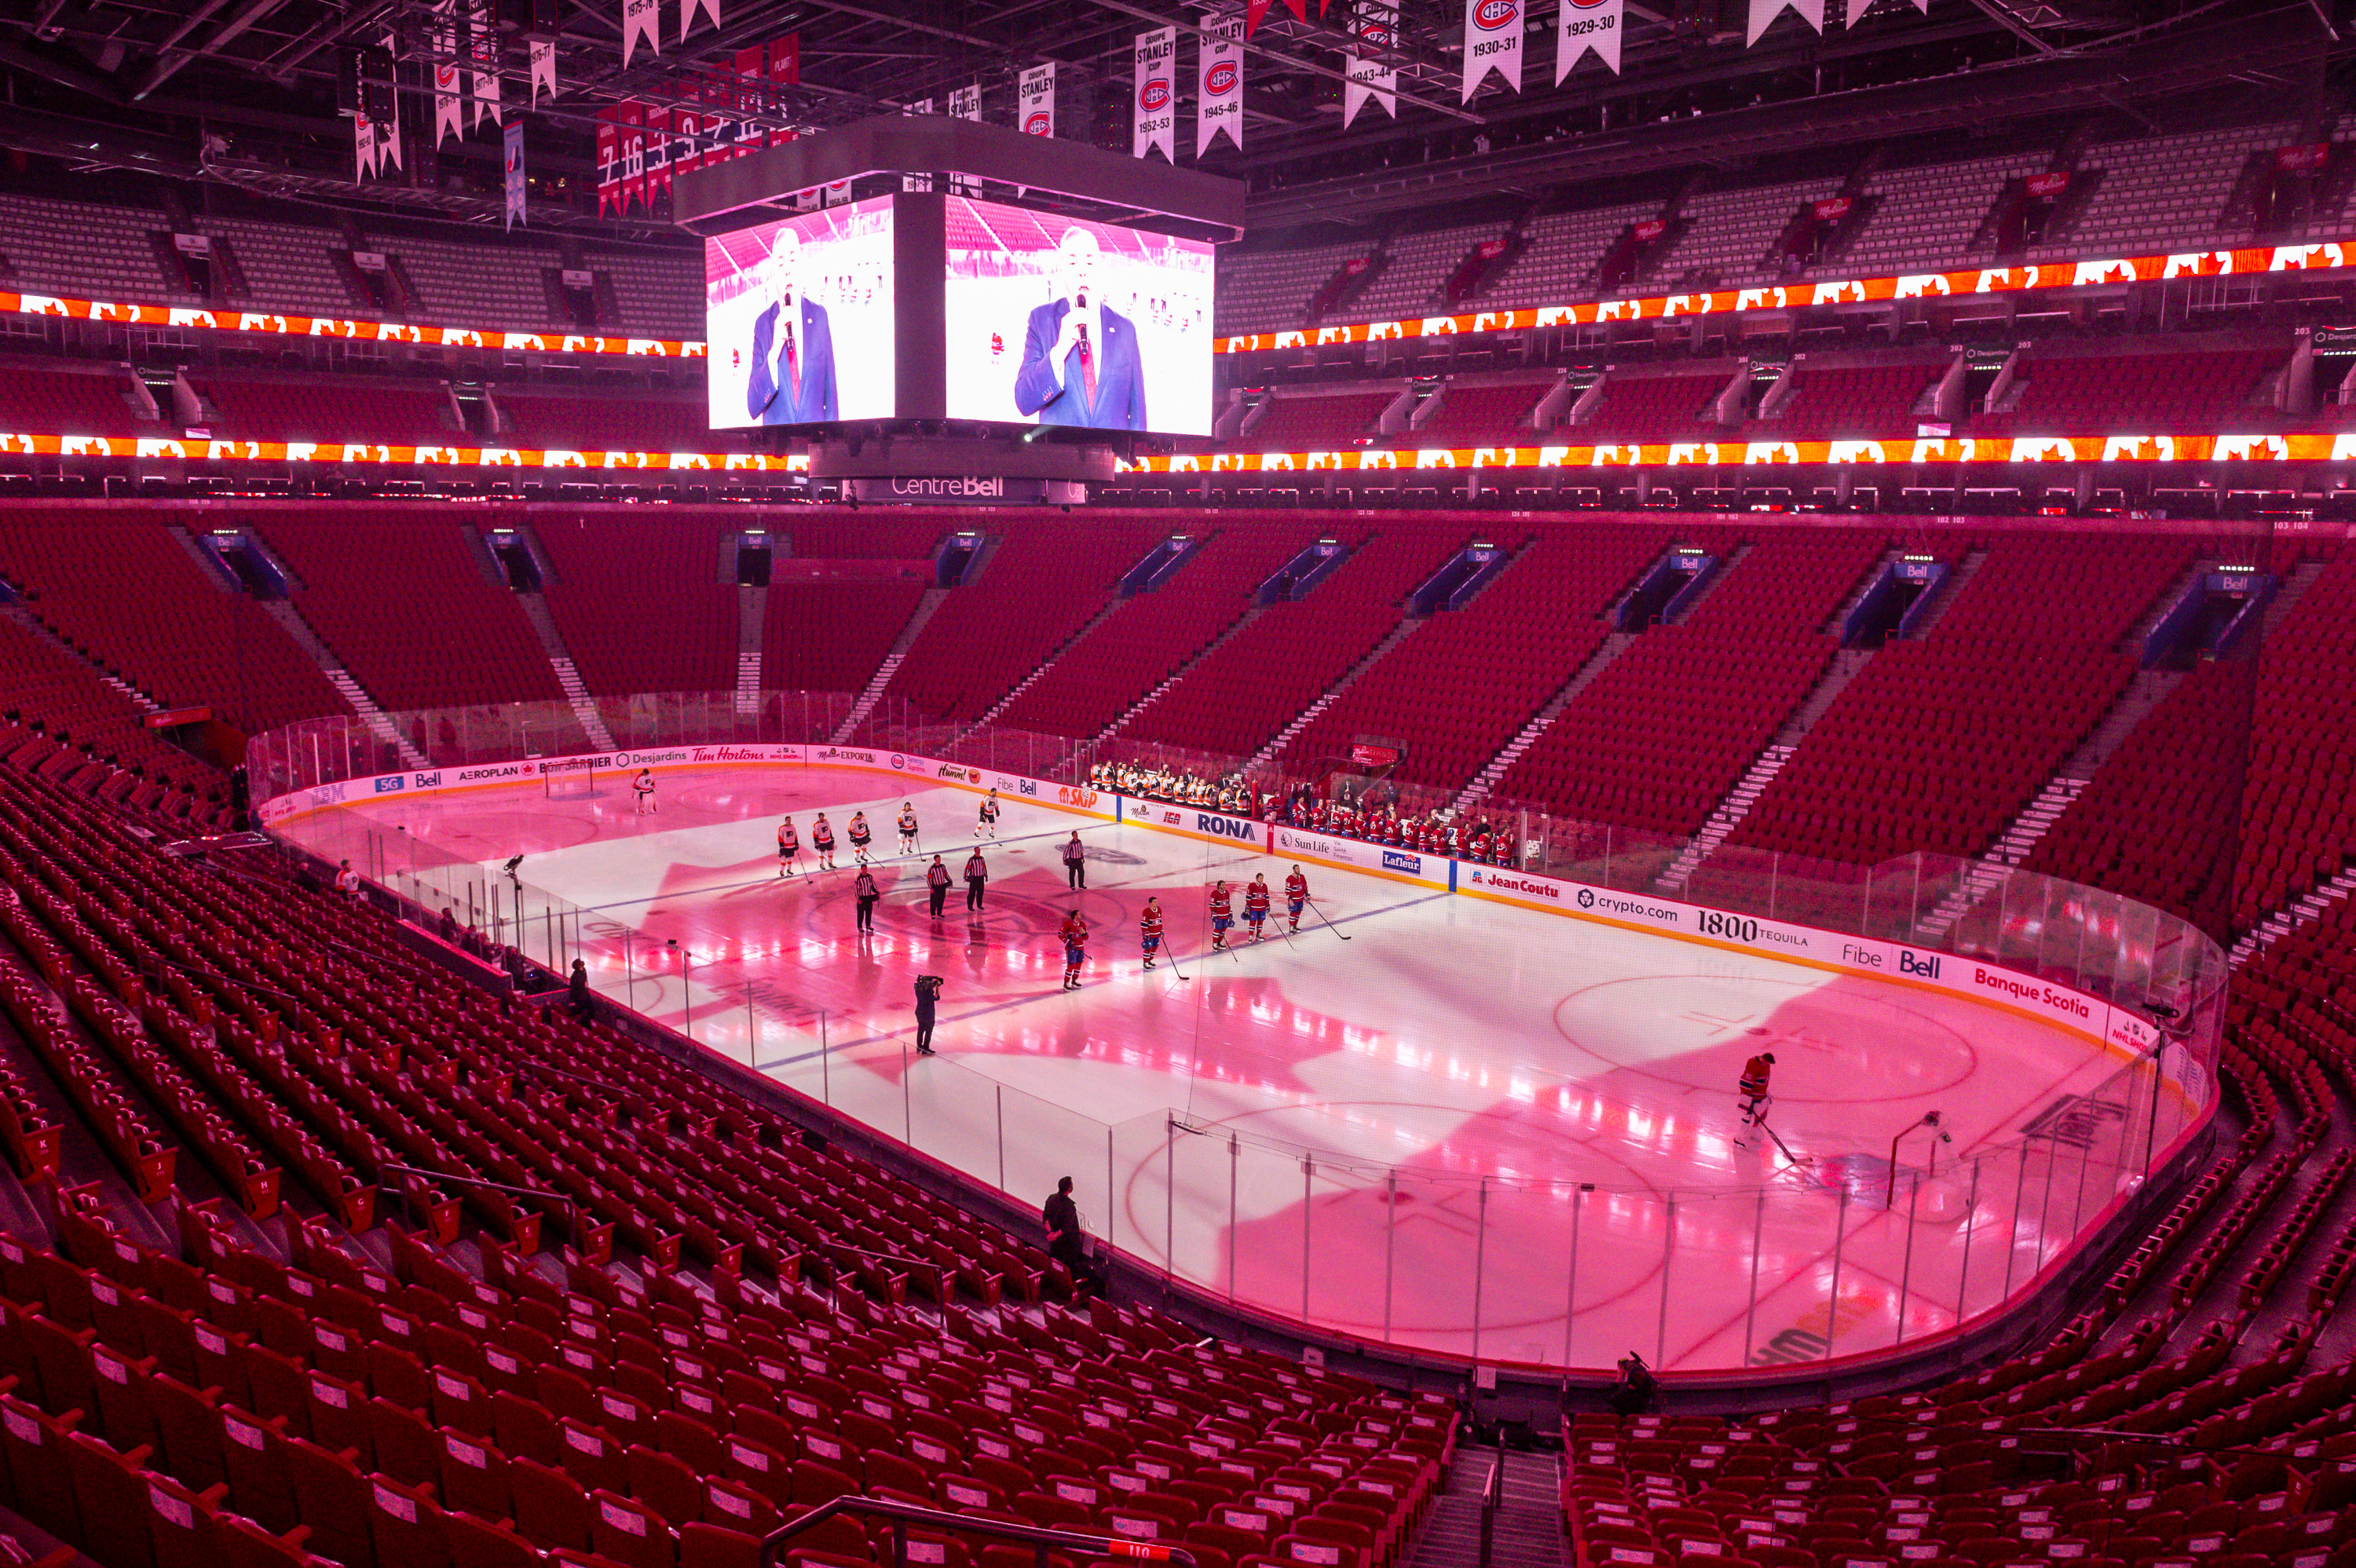 The Montreal Canadiens and the Philadelphia Flyers stand on the ice in an empty arena after the Quebec Government requested that their game be played without spectators at Centre Bell on December 16, in Montreal.